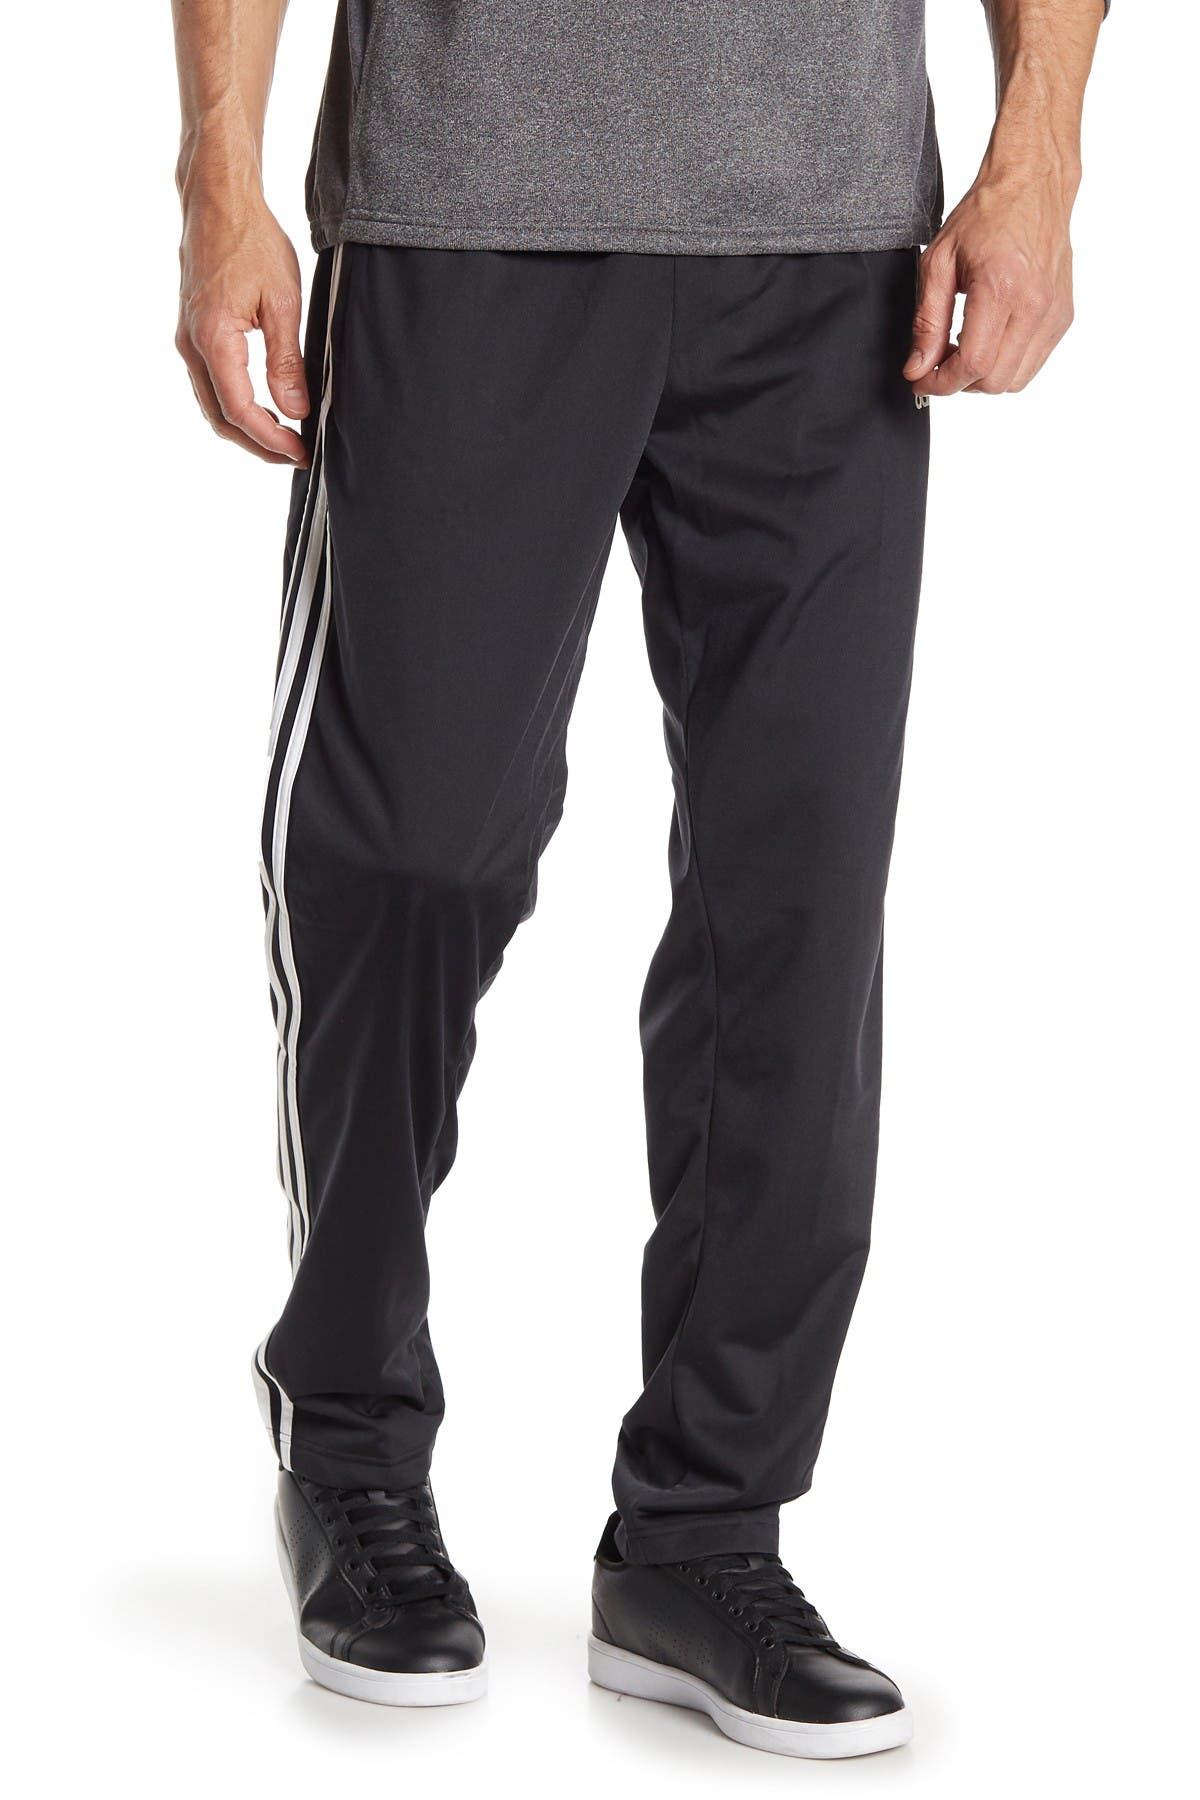 adidas essential tapered pants